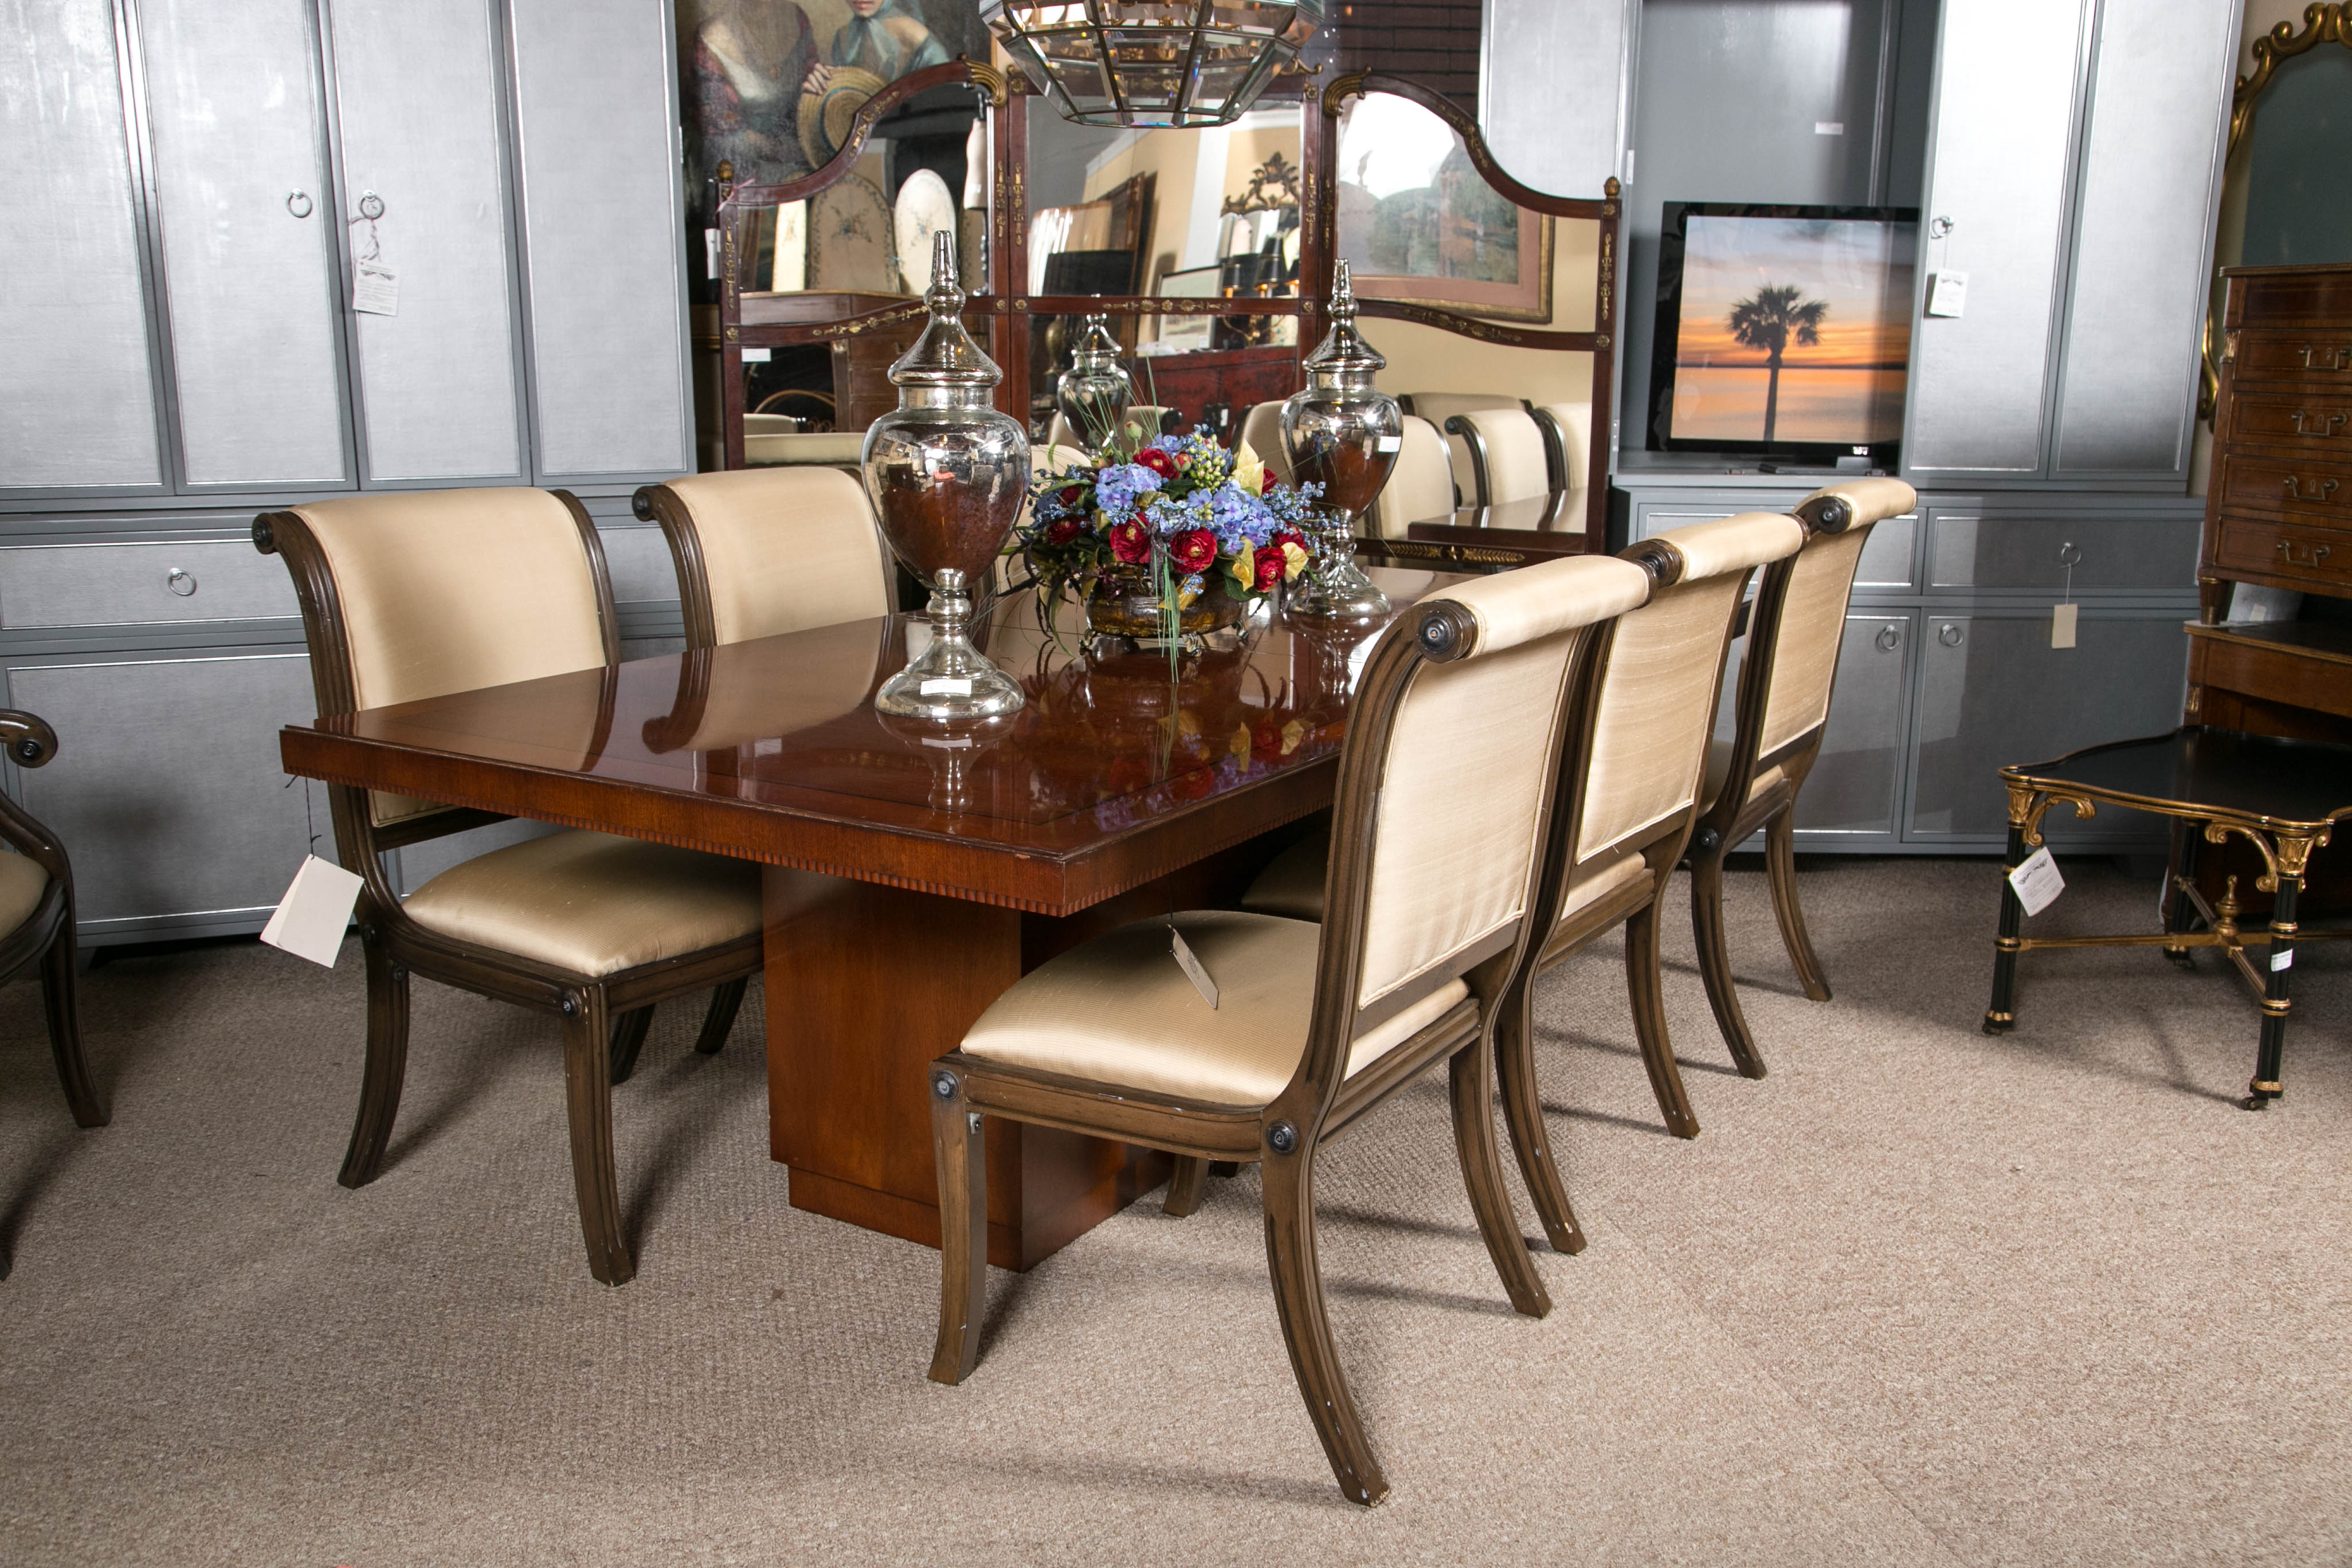 This absolutely stunning dining table made by E J Victor for Ralph Lauren is retailed at Bloomingdales as well as Ralph Lauren Home at over $18,000. This fine all solid wood walnut veneer dining table is inlaid with an ebony border and sits upon a